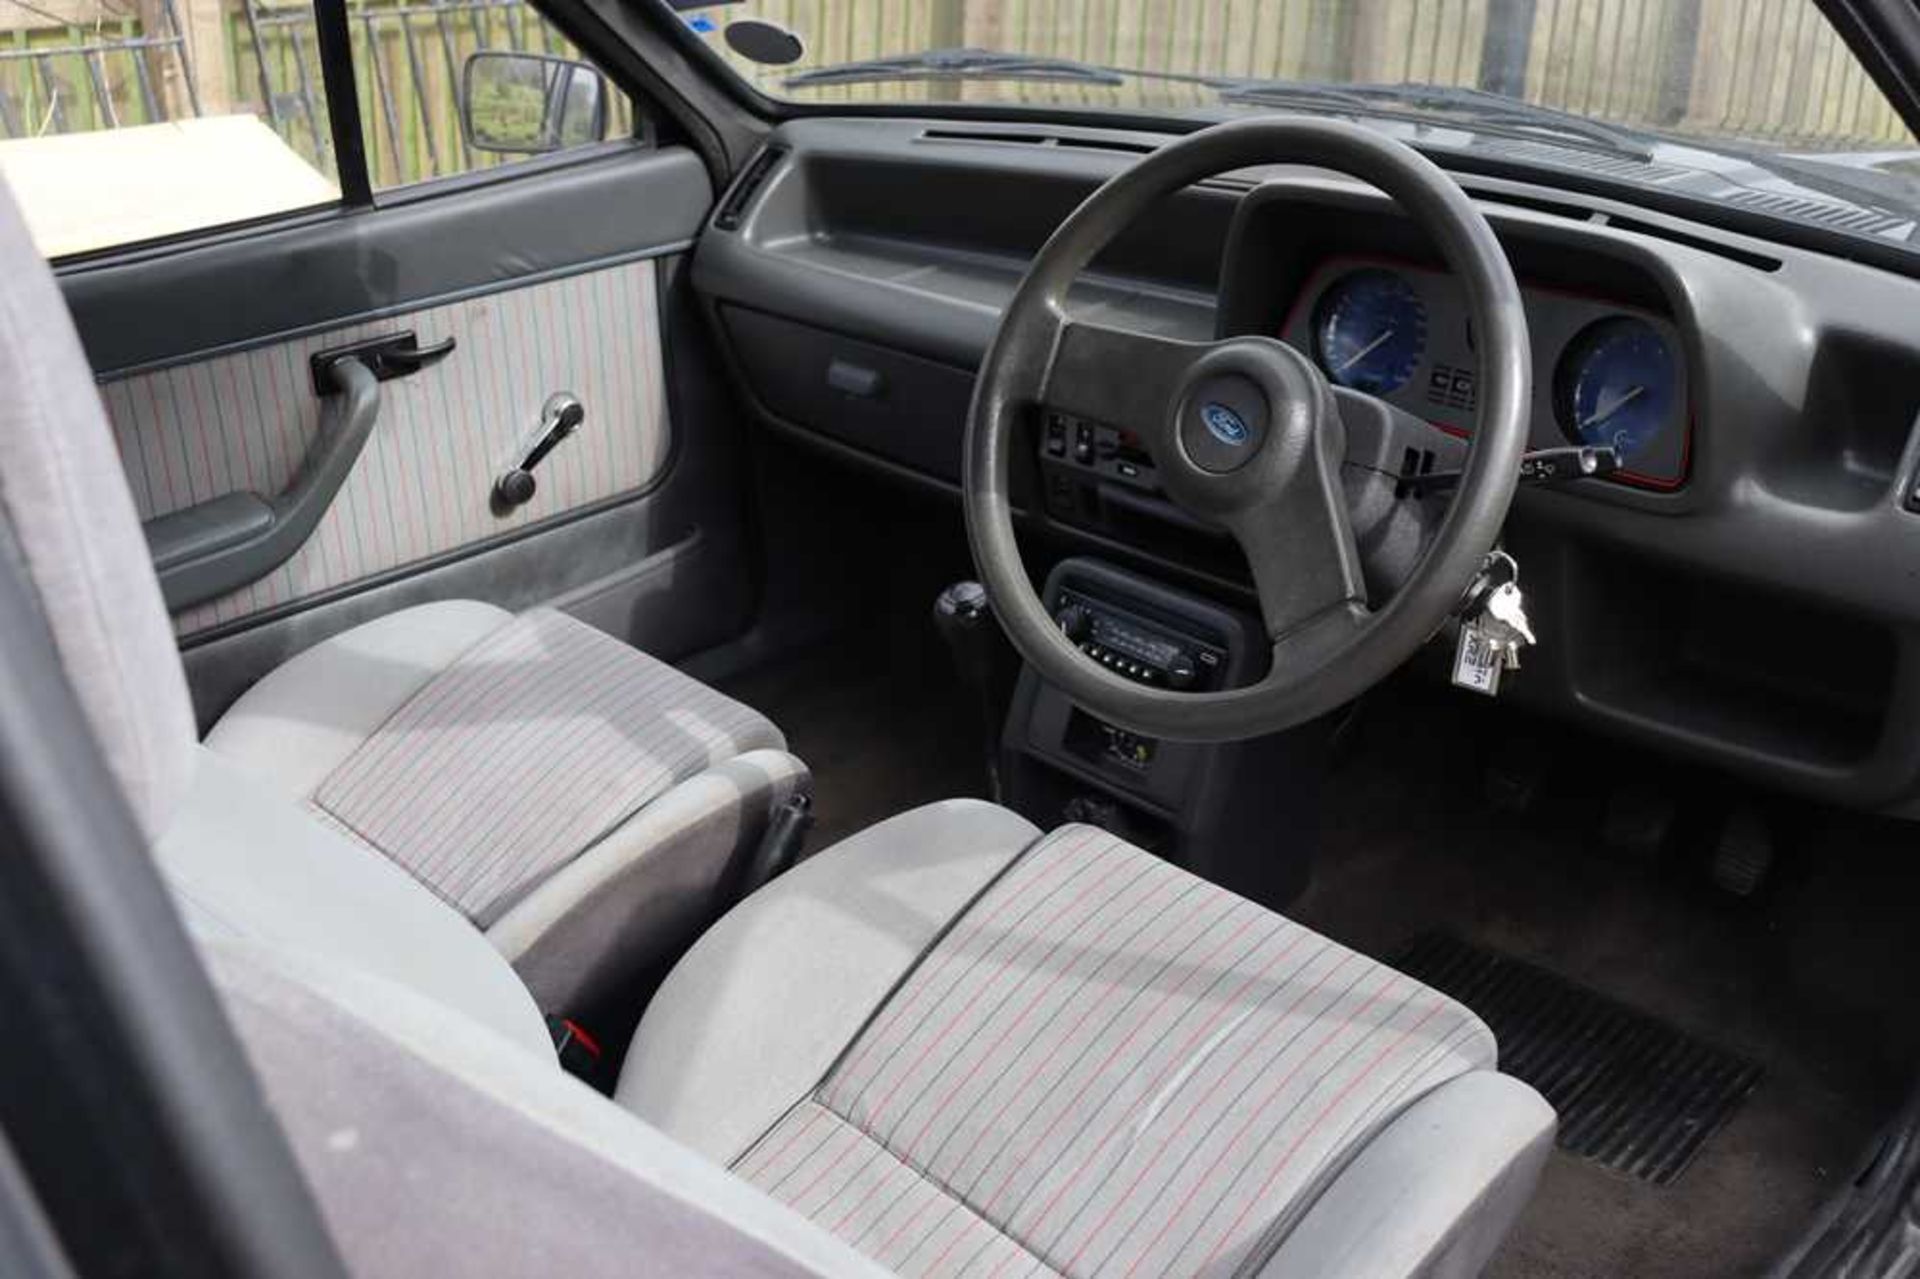 1983 Ford Fiesta XR2 - Image 14 of 56